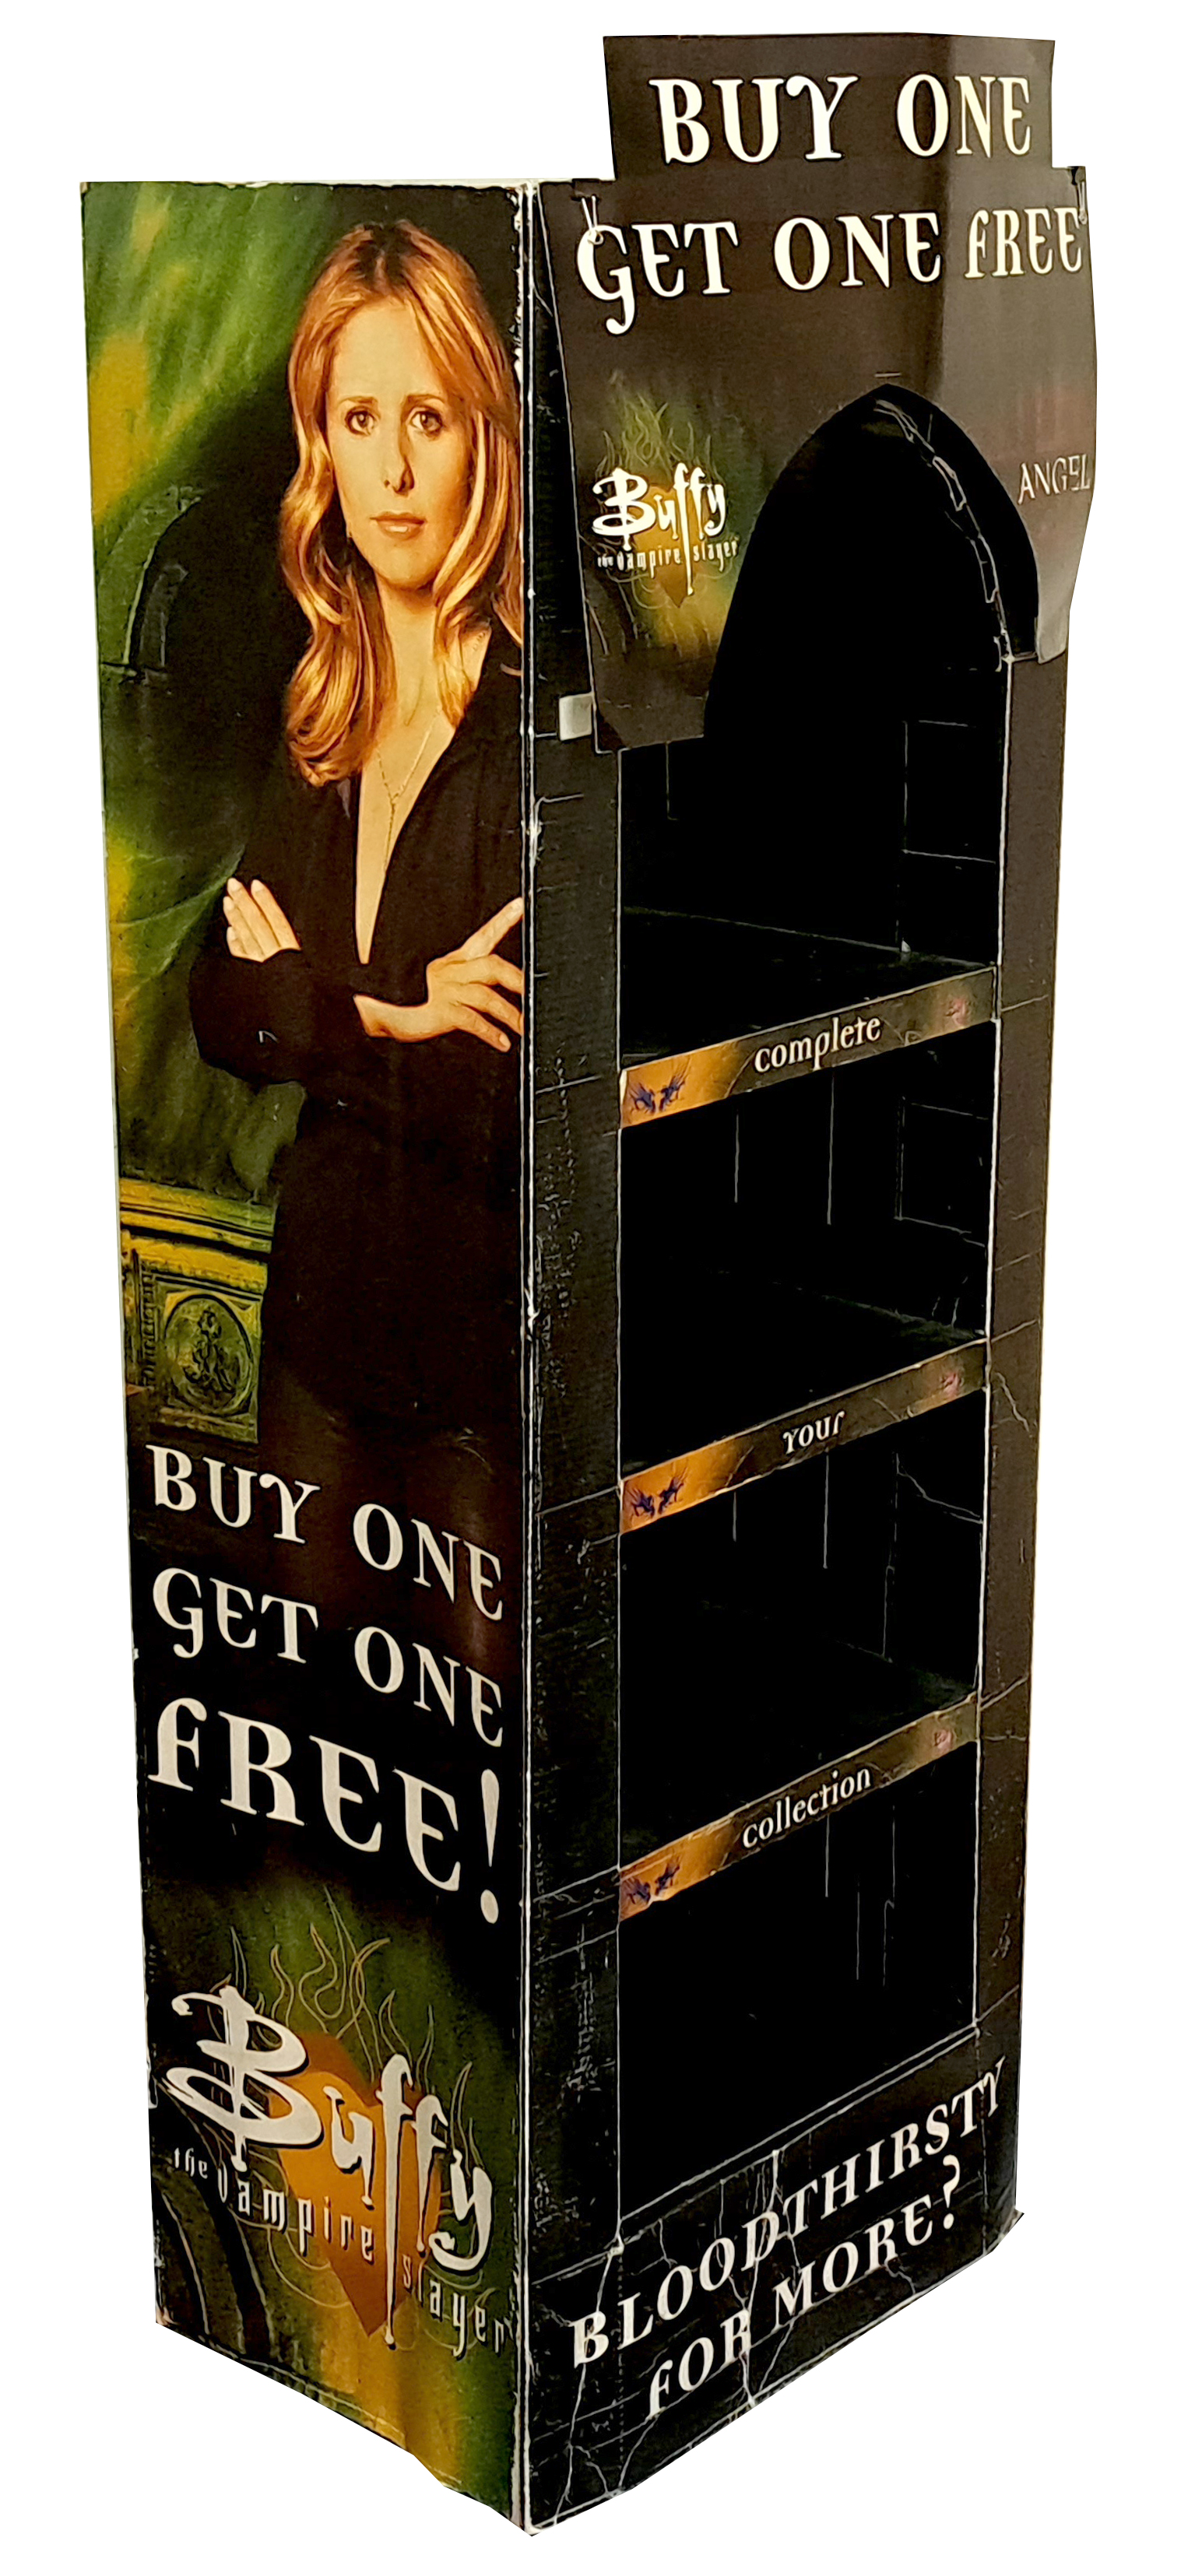 Buffy the Vampire Slayer / Angel cardboard store display stand - Image 2 of 3